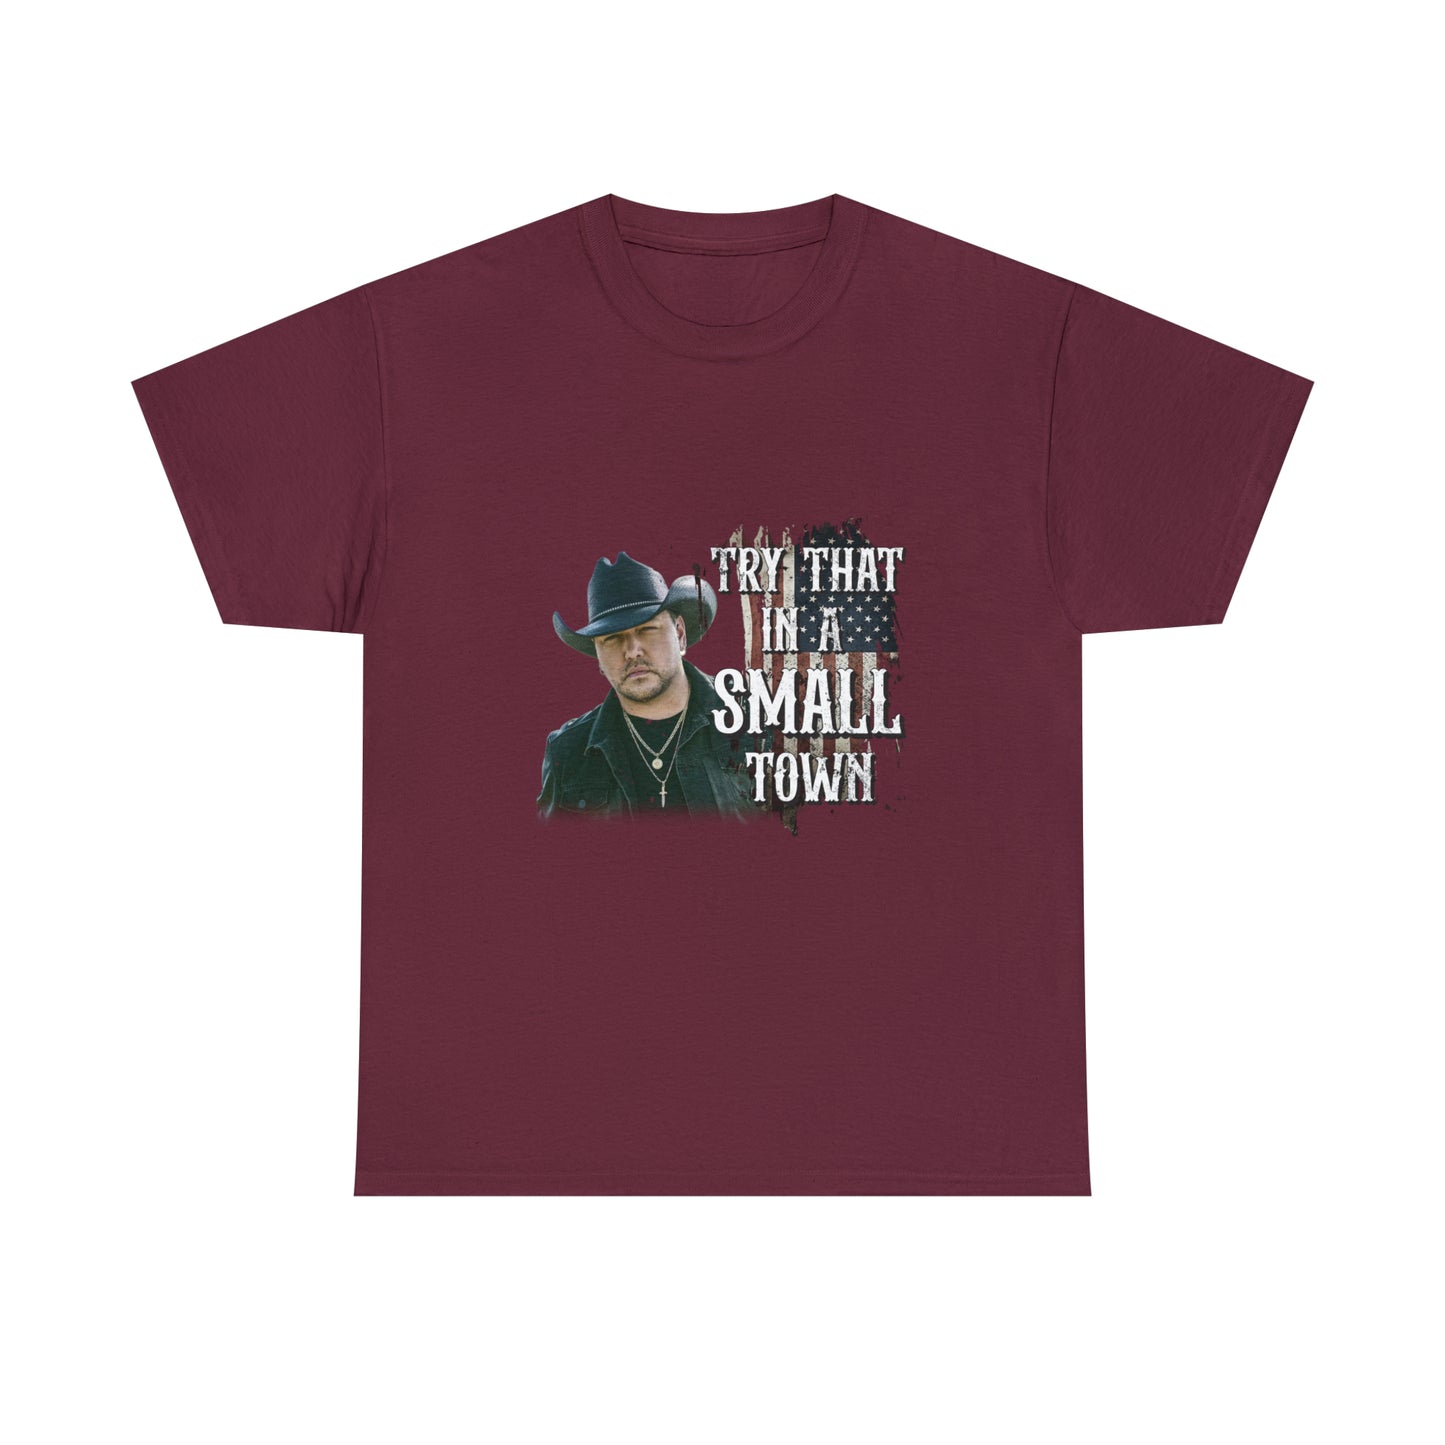 Try that in a small town Jason Aldean Unisex Heavy Cotton Tee - Maroon / S - Maroon / M - Maroon / L - Maroon / XL - Maroon / 2XL - Maroon / 3XL - Maroon / 4XL - Maroon / 5XL